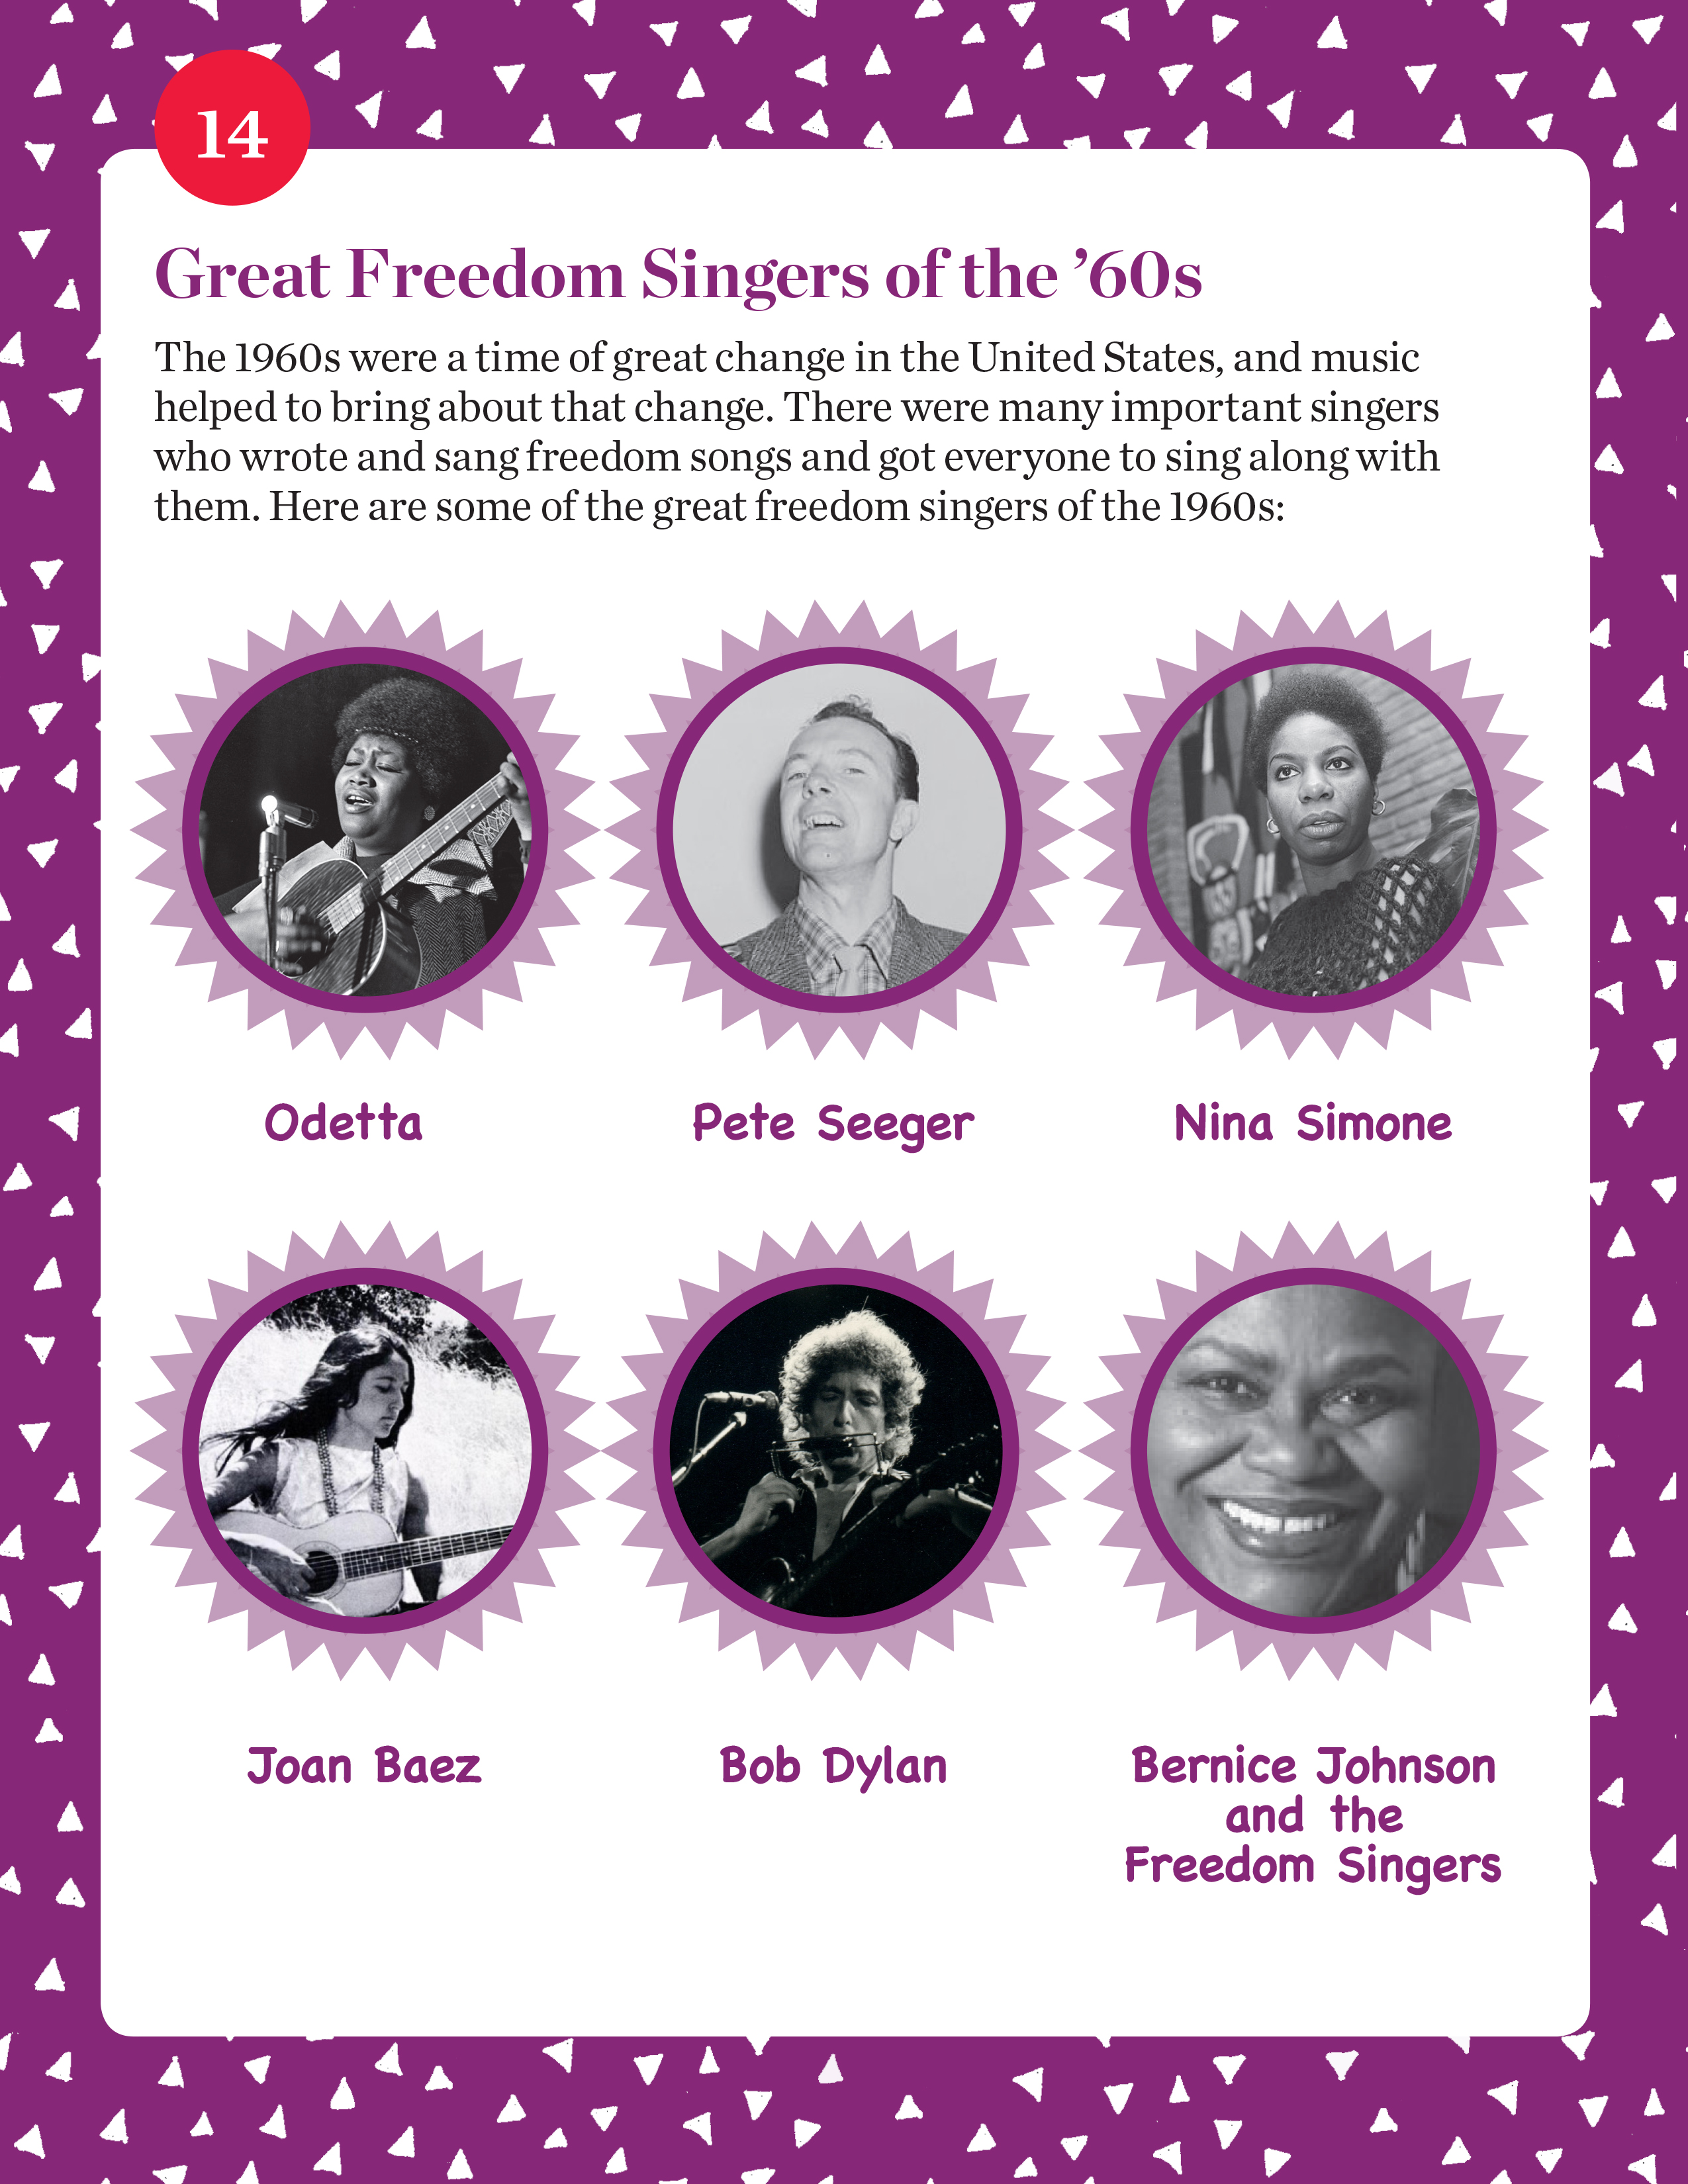 Great Freedom Singers of the '60s